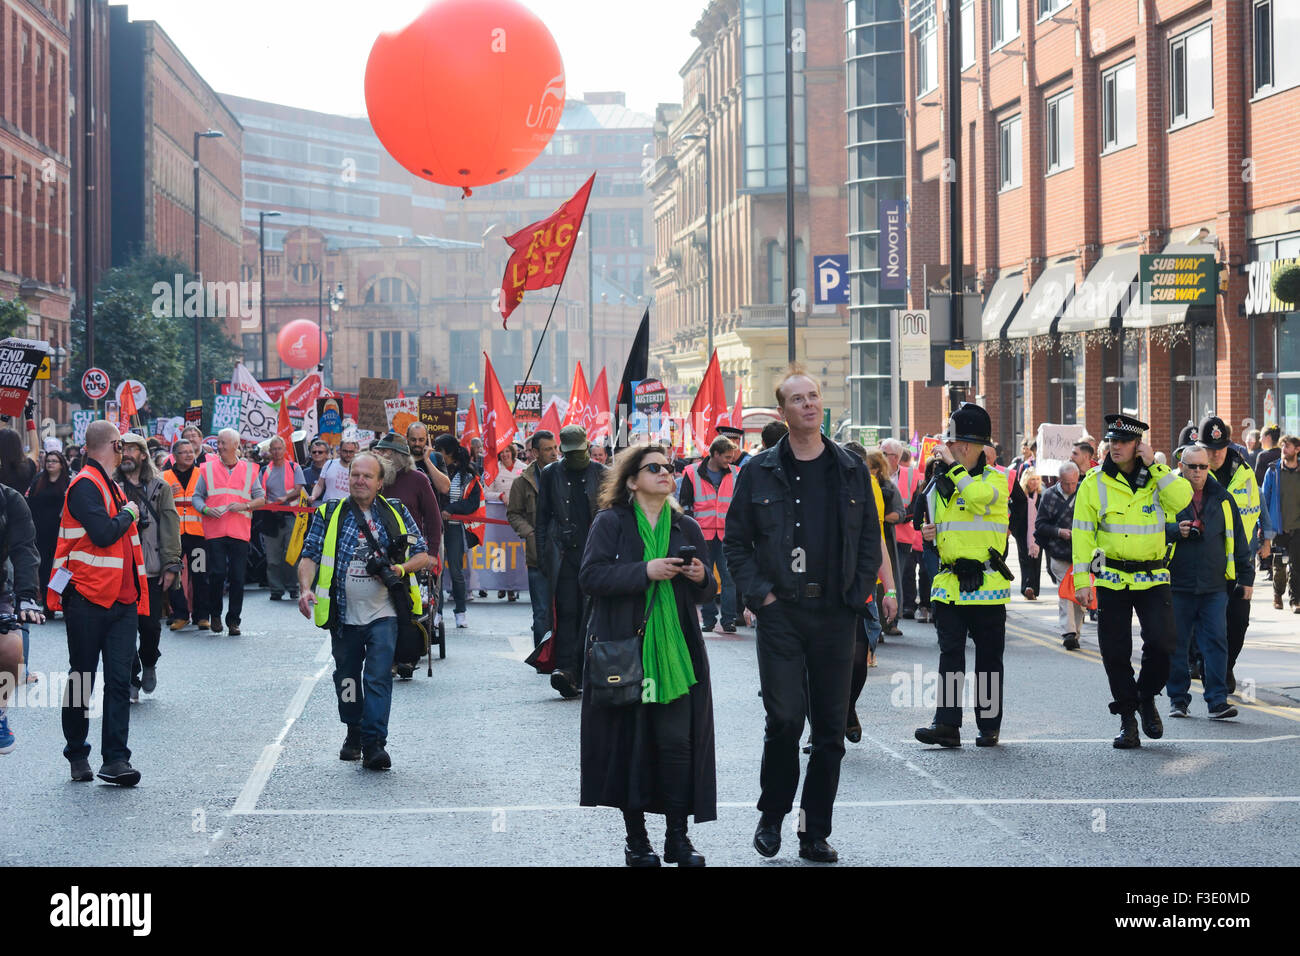 Anti-austerity march through Manchester city centre during the Conservative Party Conference. Stock Photo